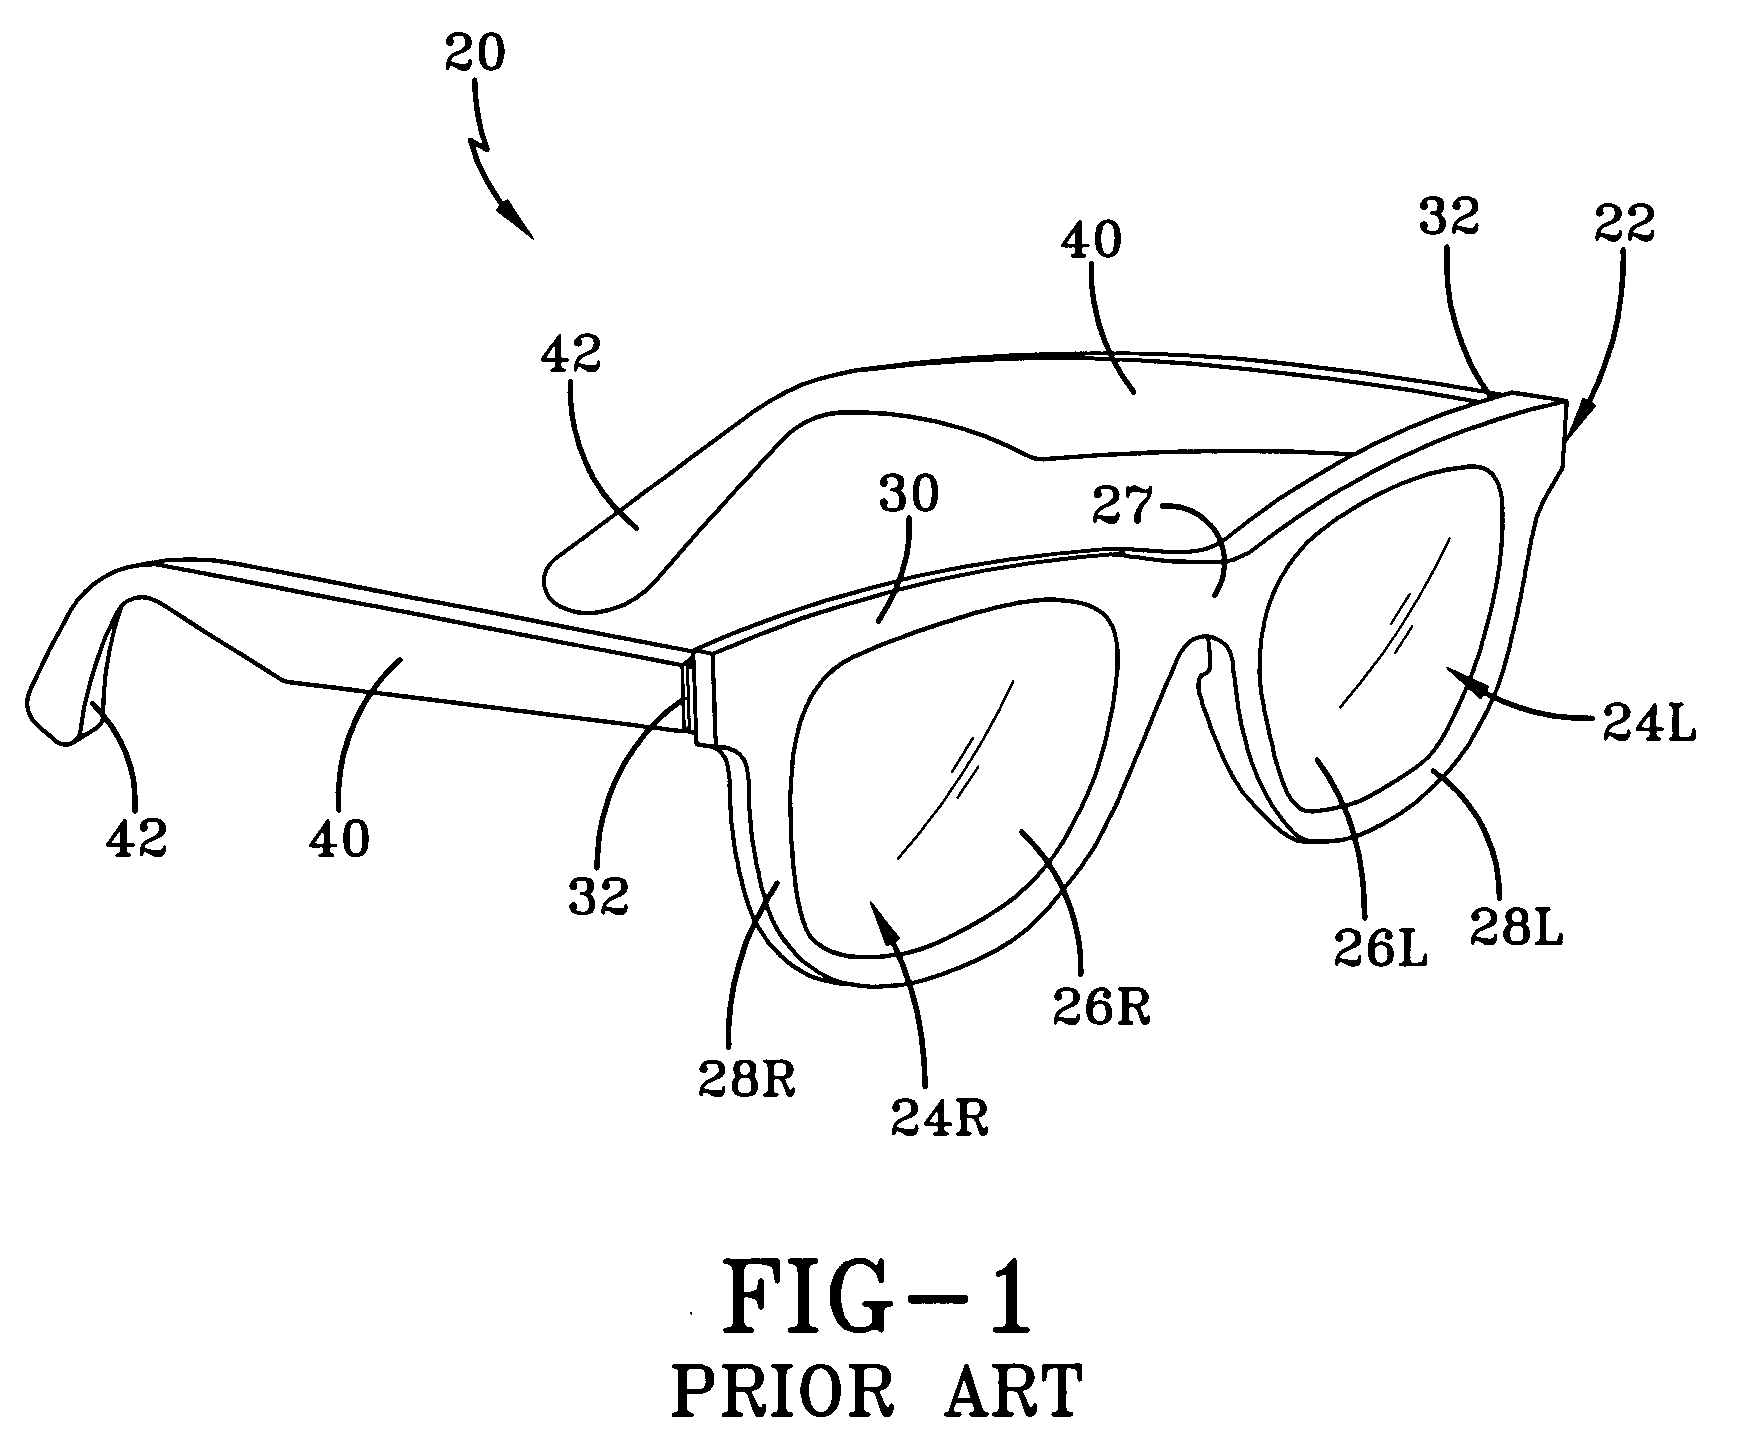 Eyewear incorporating lenses with electronically variable optical properties